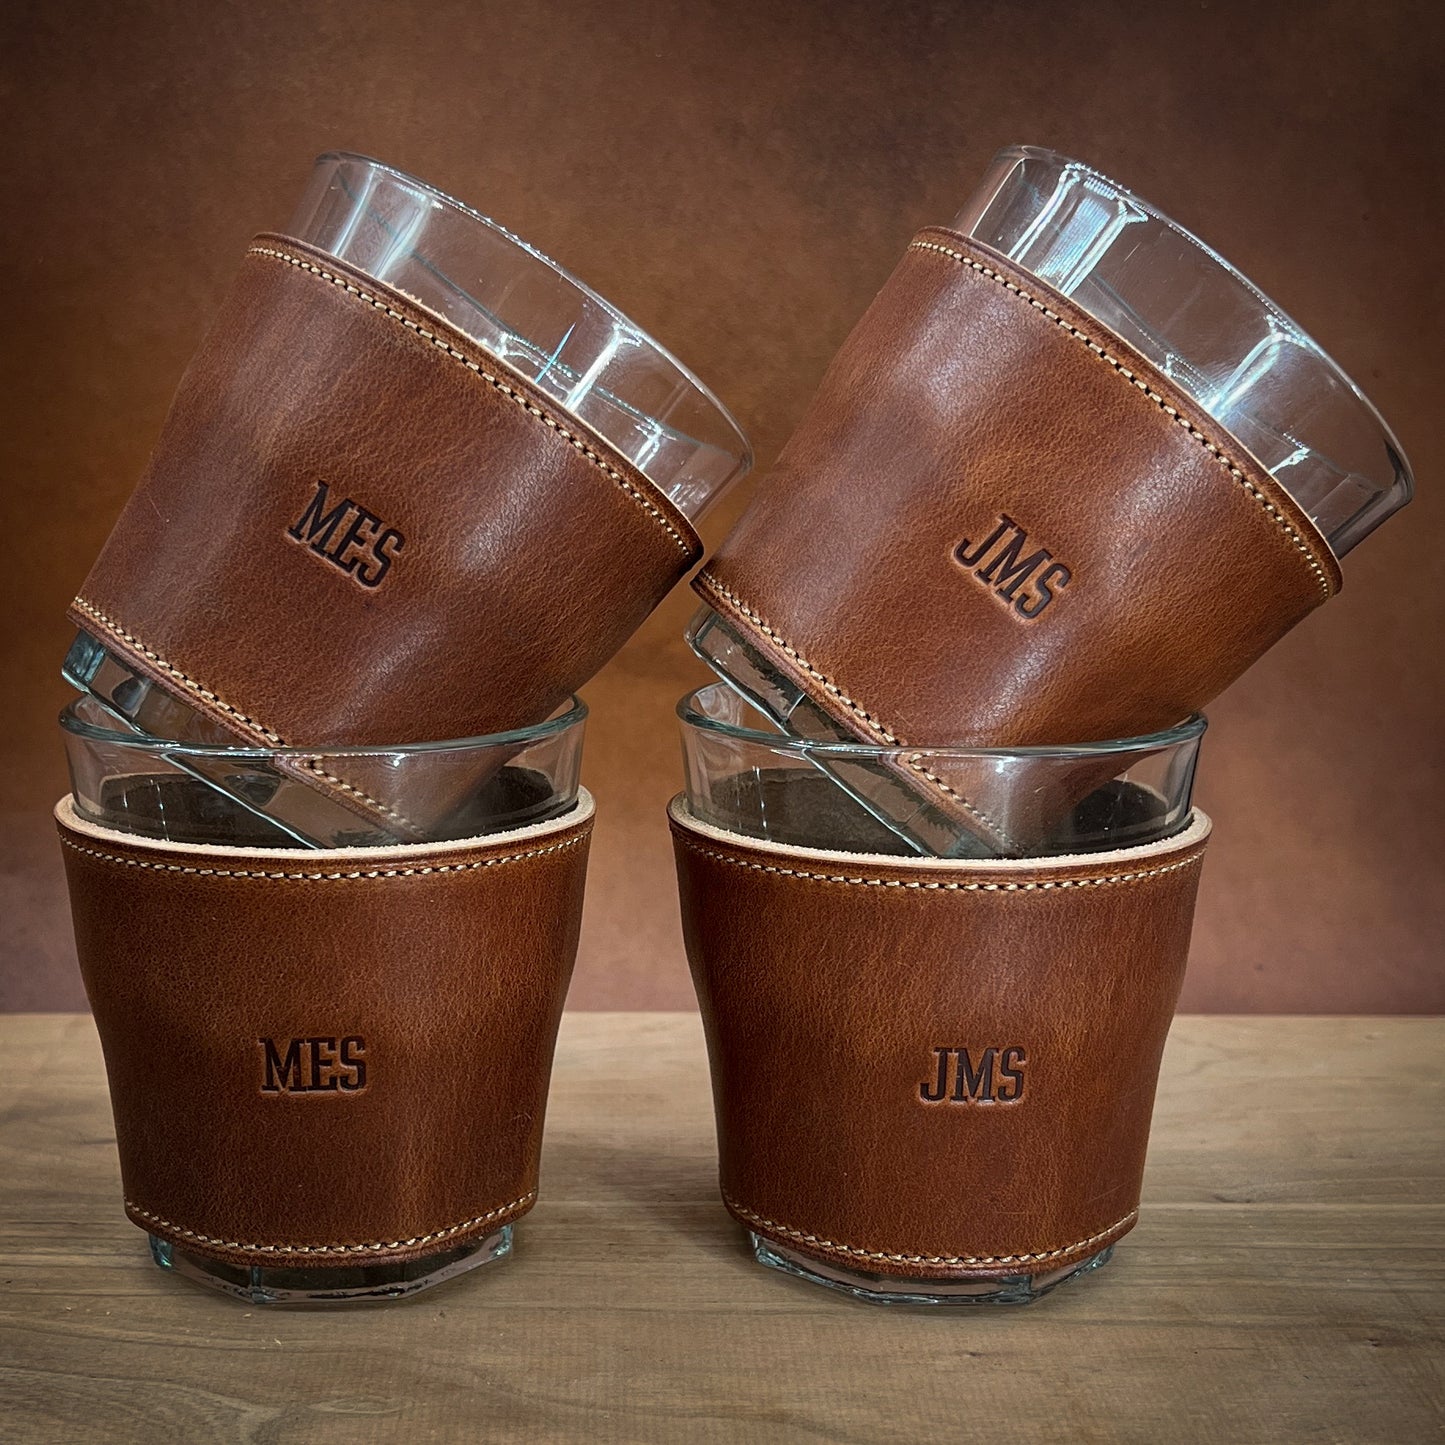 Monogrammed Whiskey Glasses wrapped in Horween Leather